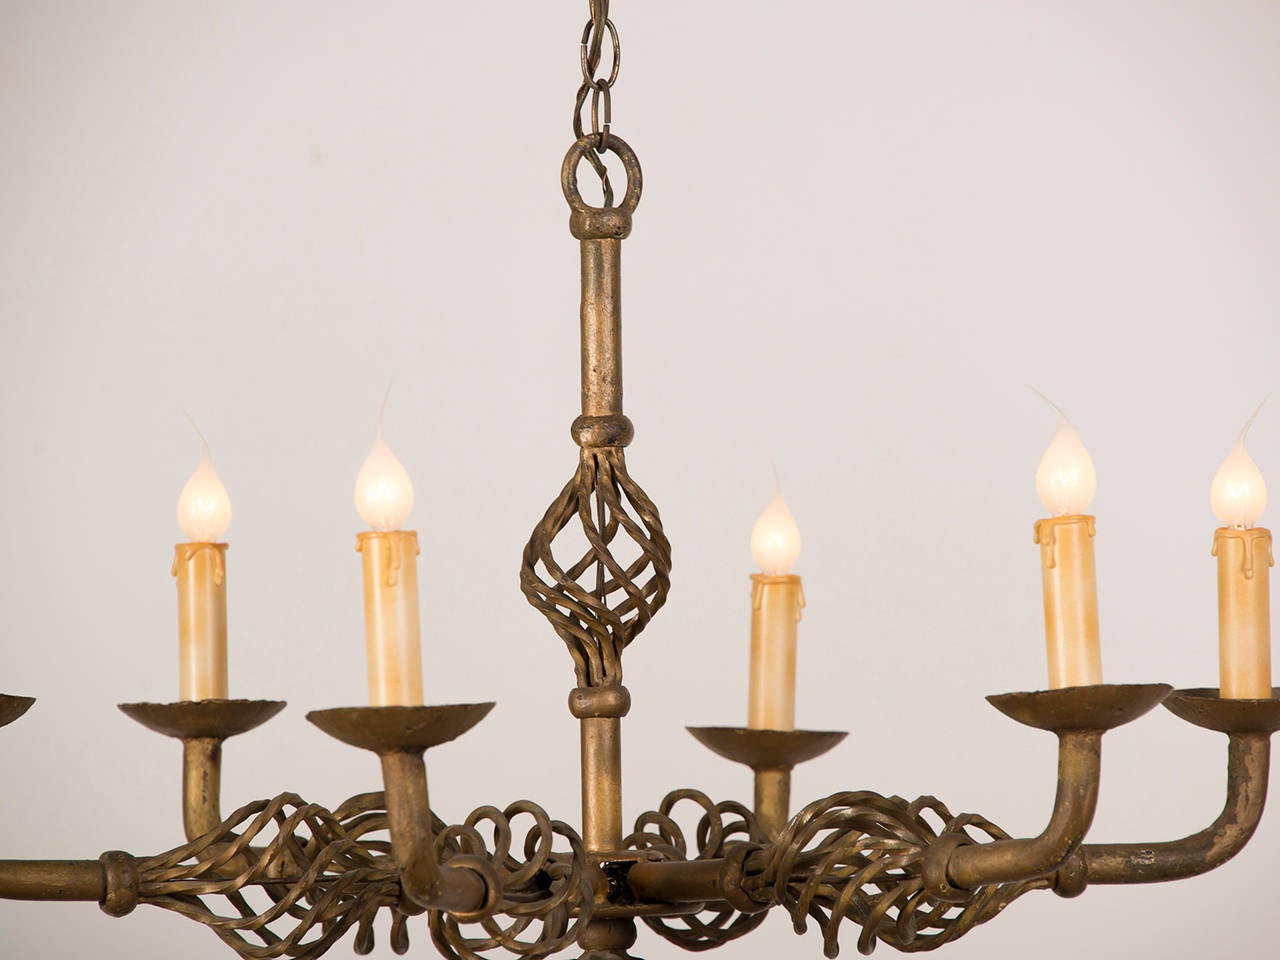 Receive our new selections direct from 1stdibs by email each week. Please click Follow Dealer below and see them first!

A unique gilded and forged iron six light vintage French chandelier circa 1930 with an open spiral twist design.